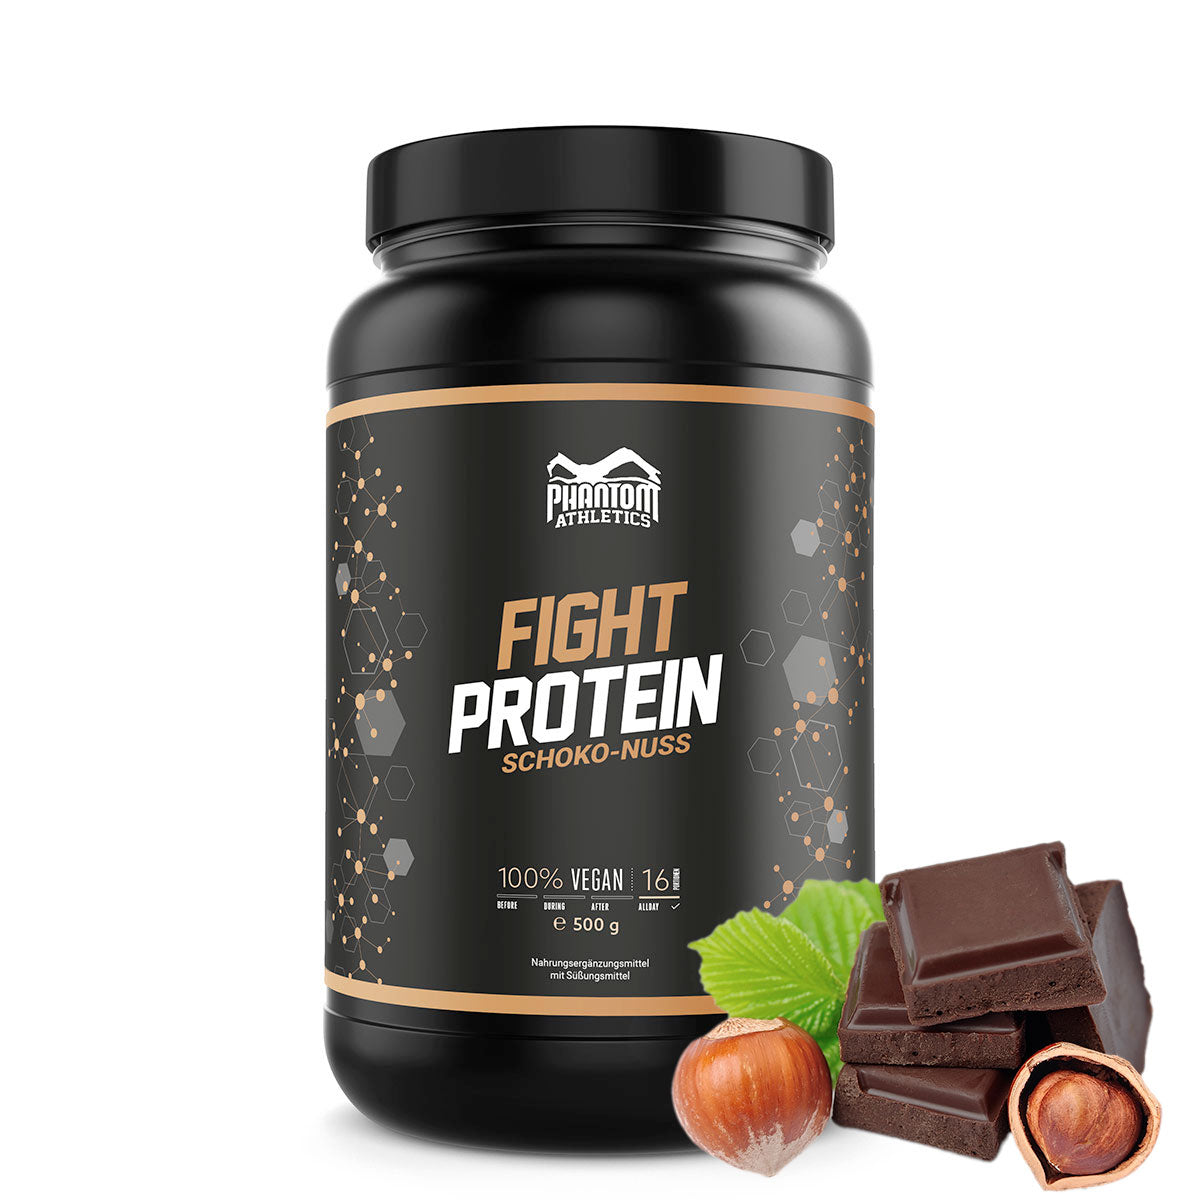 Phantom FIGHT protein for martial artists with chocolate nut flavor.